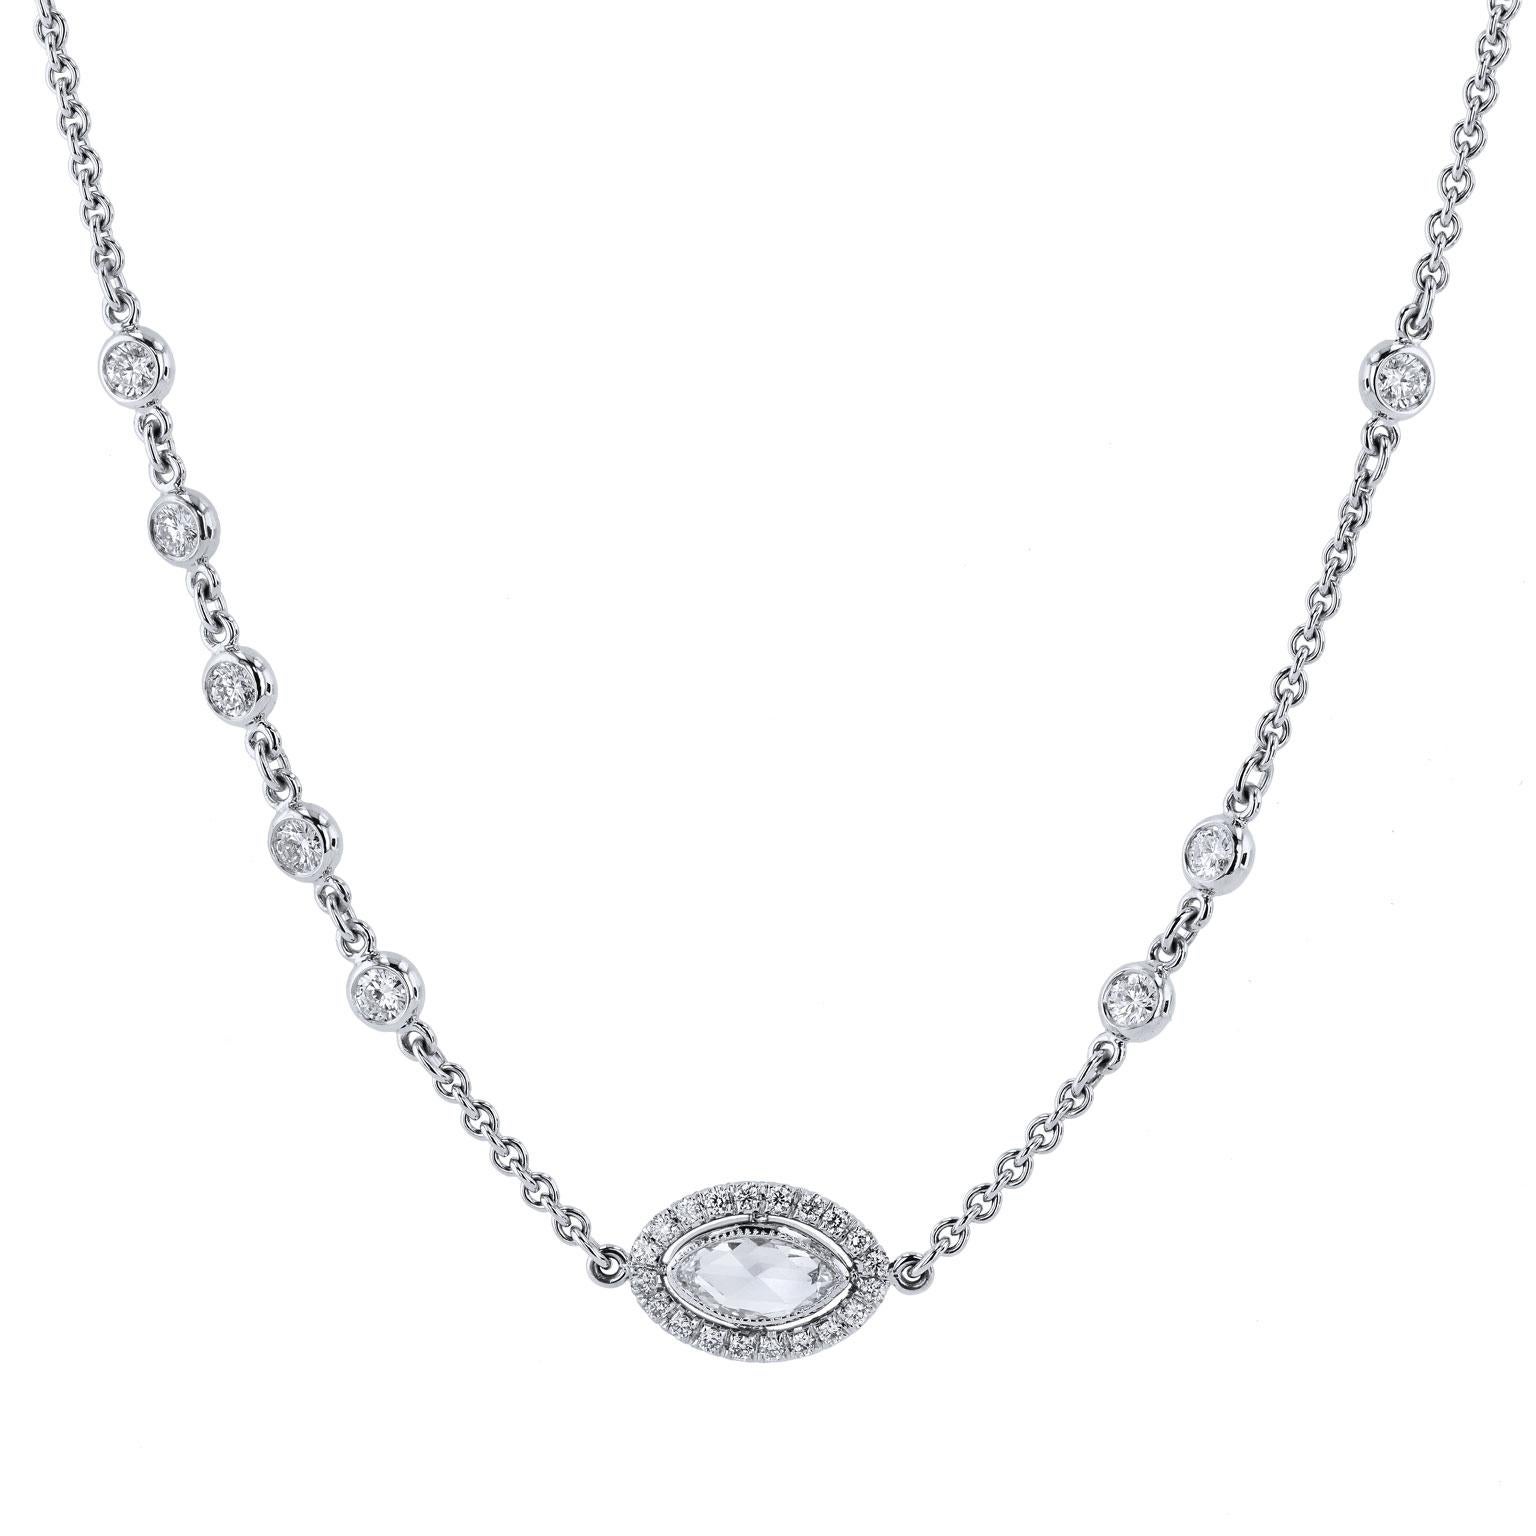 4.98 carats of Bezel set Diamonds by The Yard in 18 karat White Gold Necklace

This is a one of a kind, original, handmade by H&H Jewels.  

This necklace is 18 karat white gold featuring flipping stations of 4.98 carats in total weight of rose cut